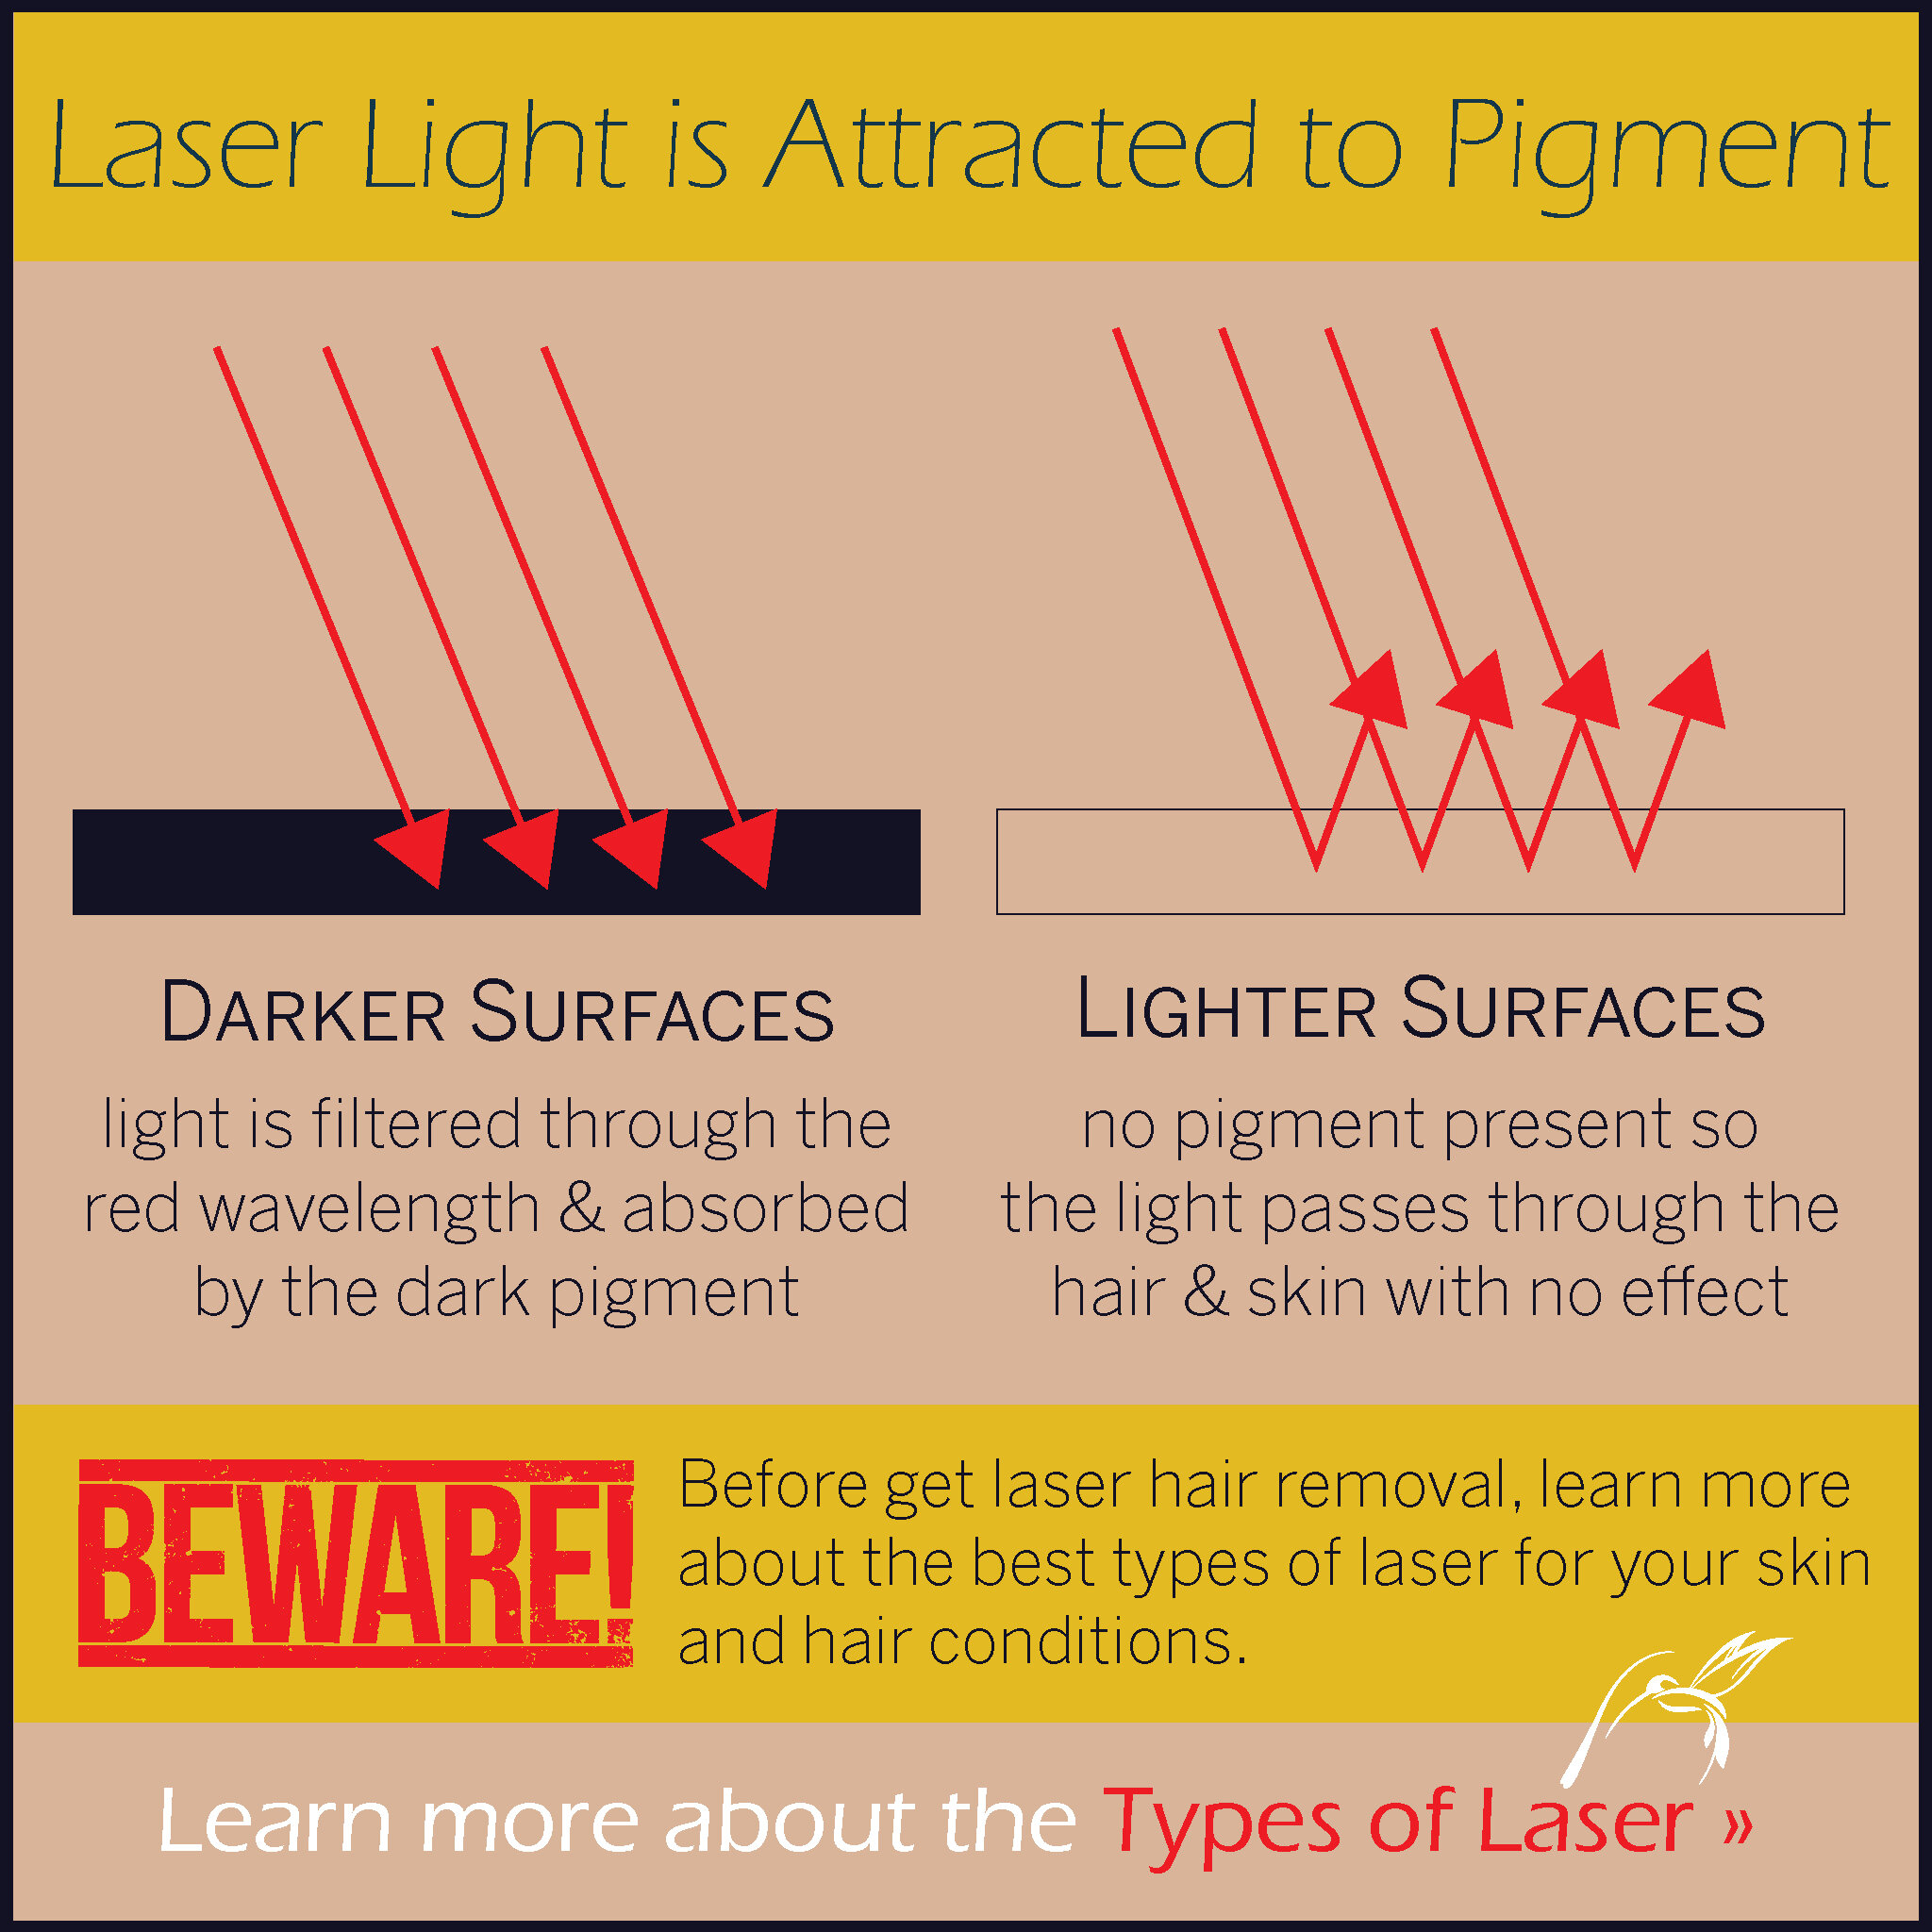 Laser Light is Attracted to Pigment